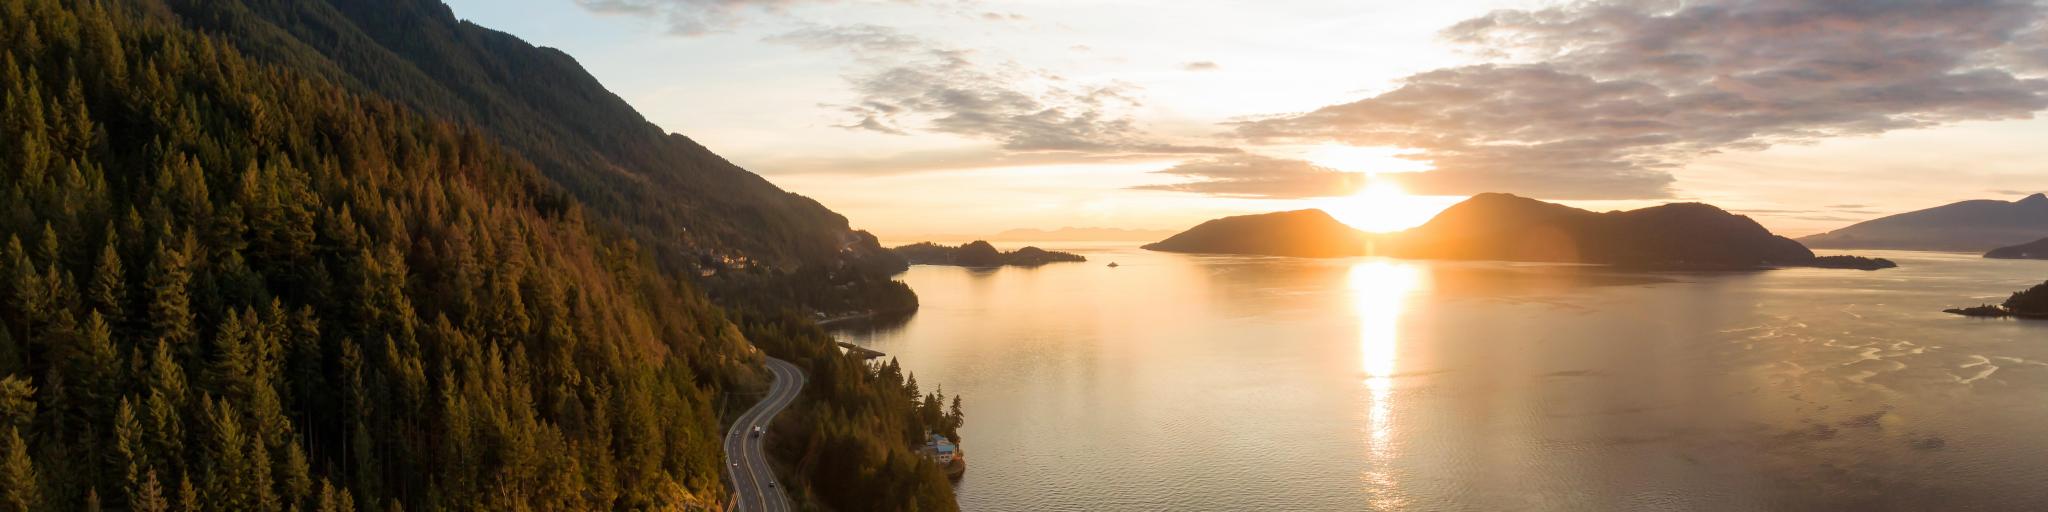 The Sea to Sky Highway, West Vancouver, British Columbia, Canada with a view of Horseshoe Bay take as an aerial panoramic view during a colorful sunset in Fall season.